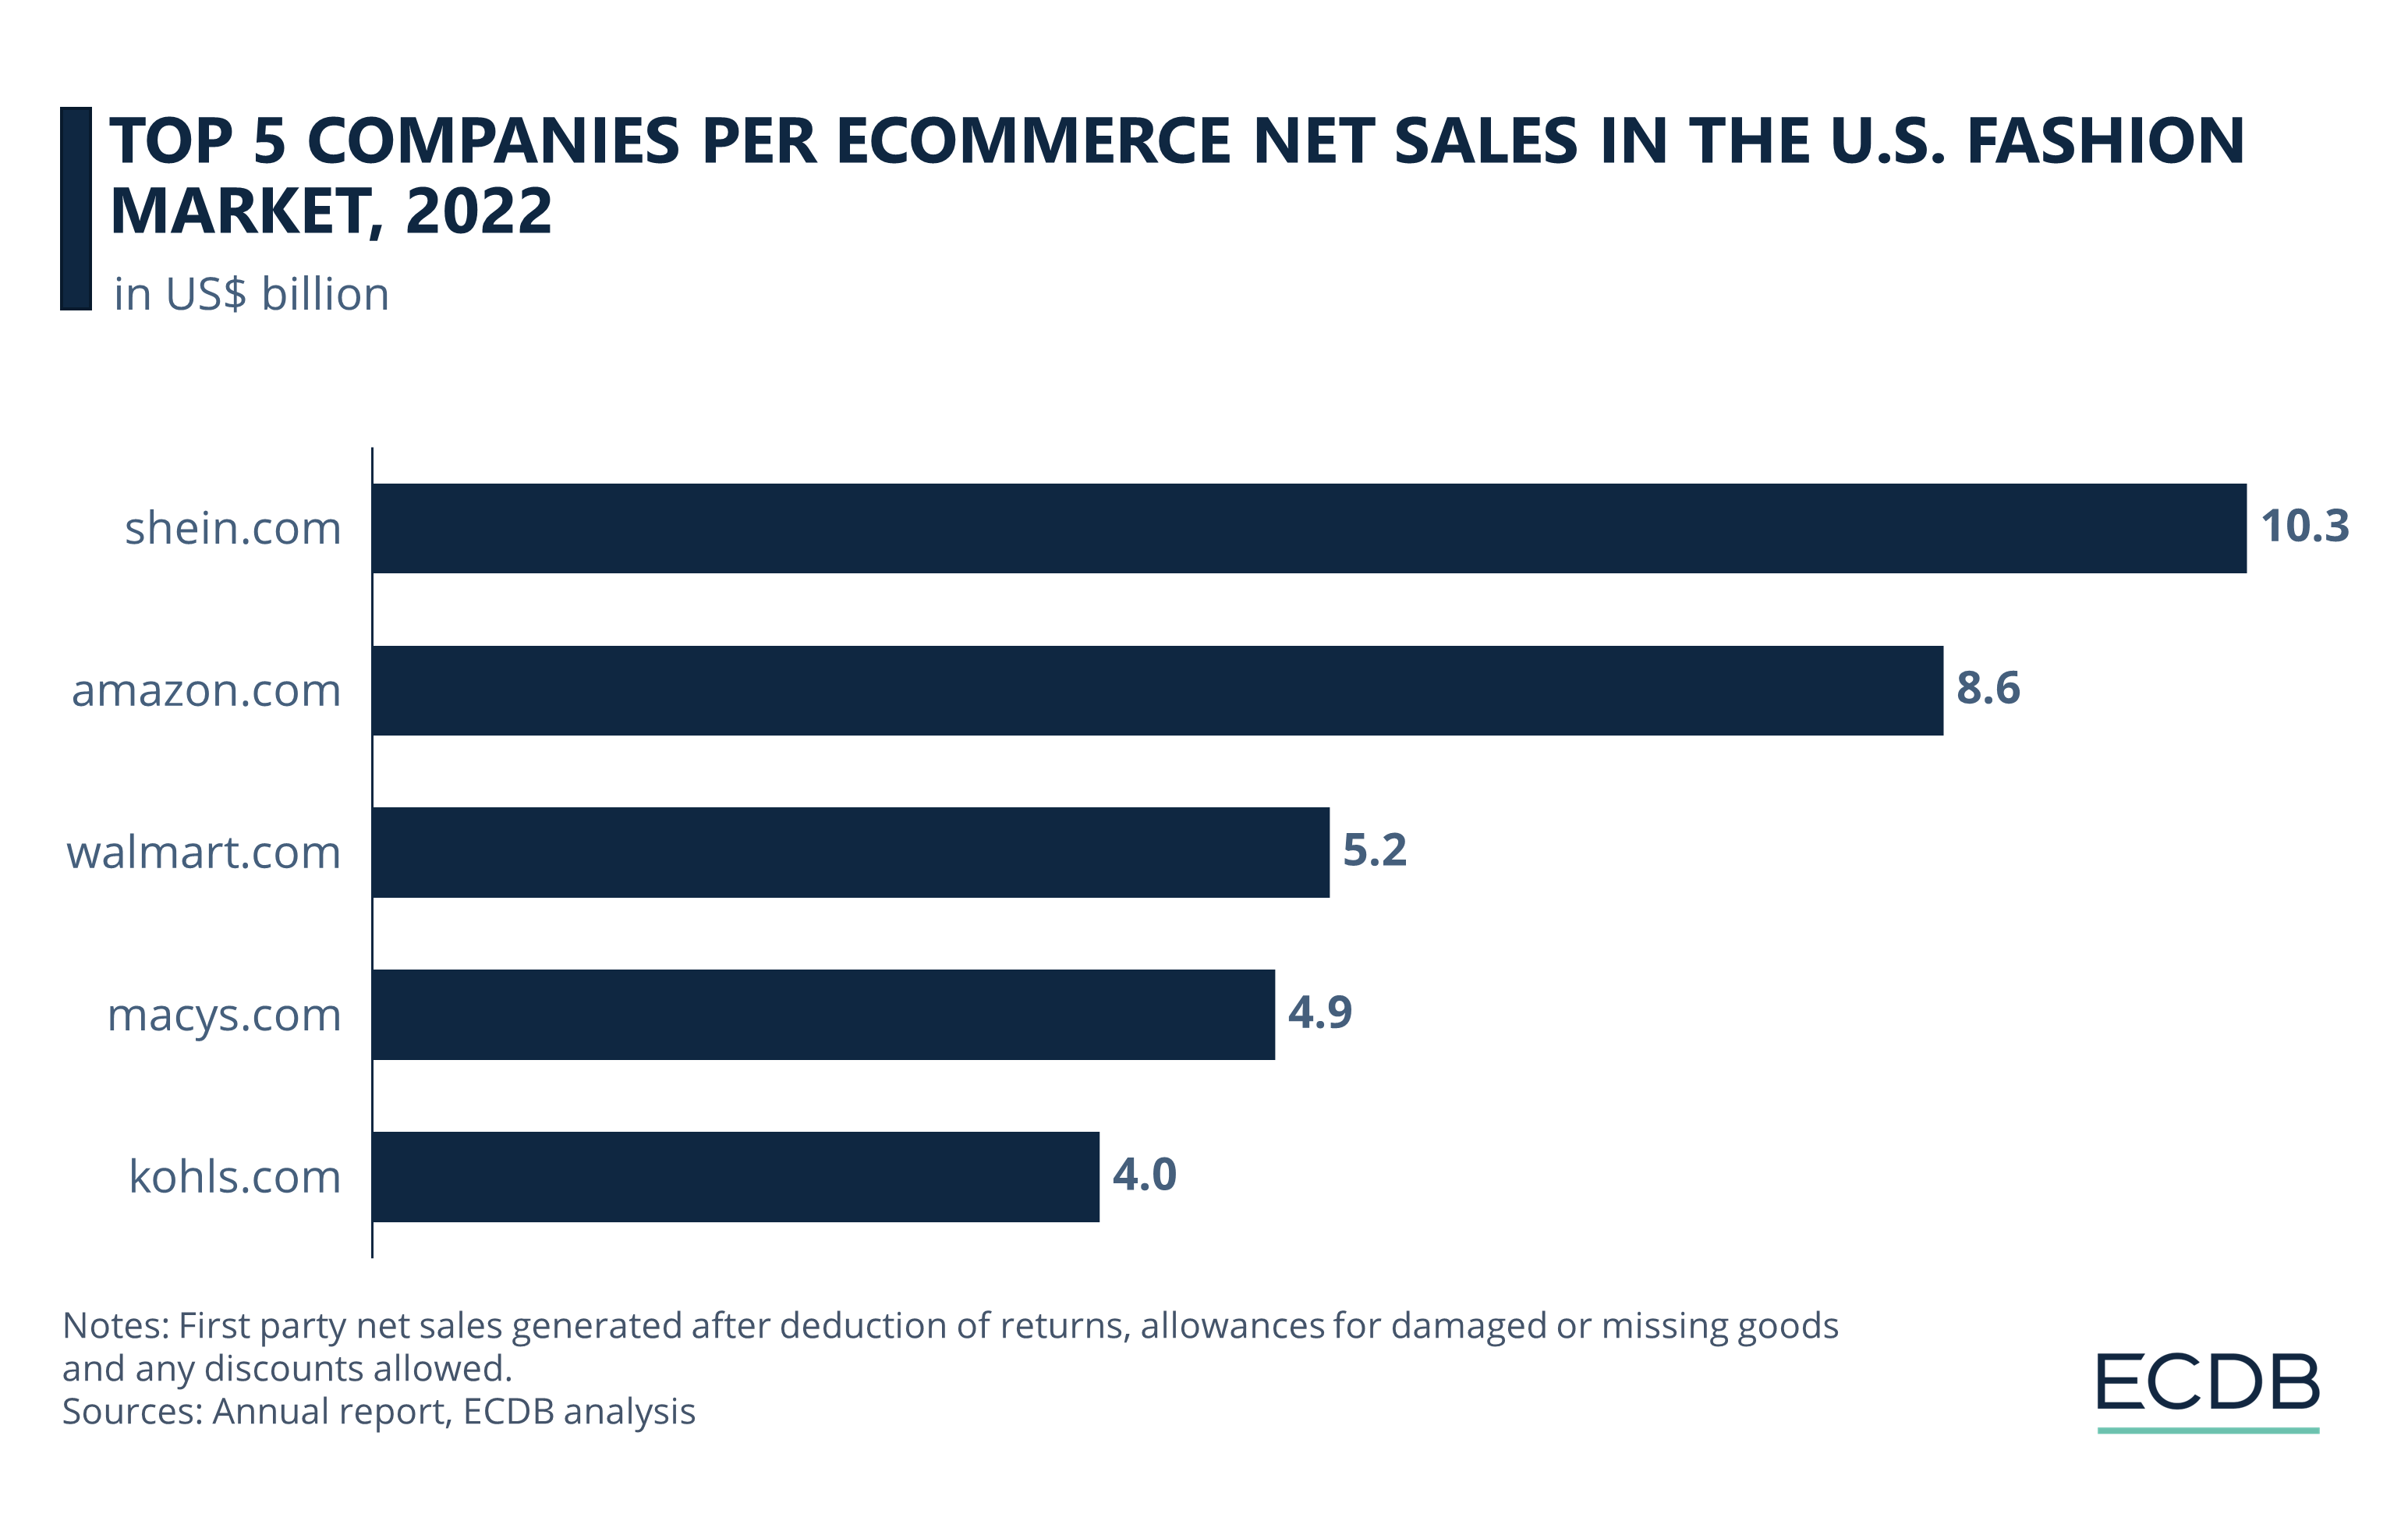 Top 5 Companies per eCommerce Net Sales in the U.S. Fashion Market in 2022